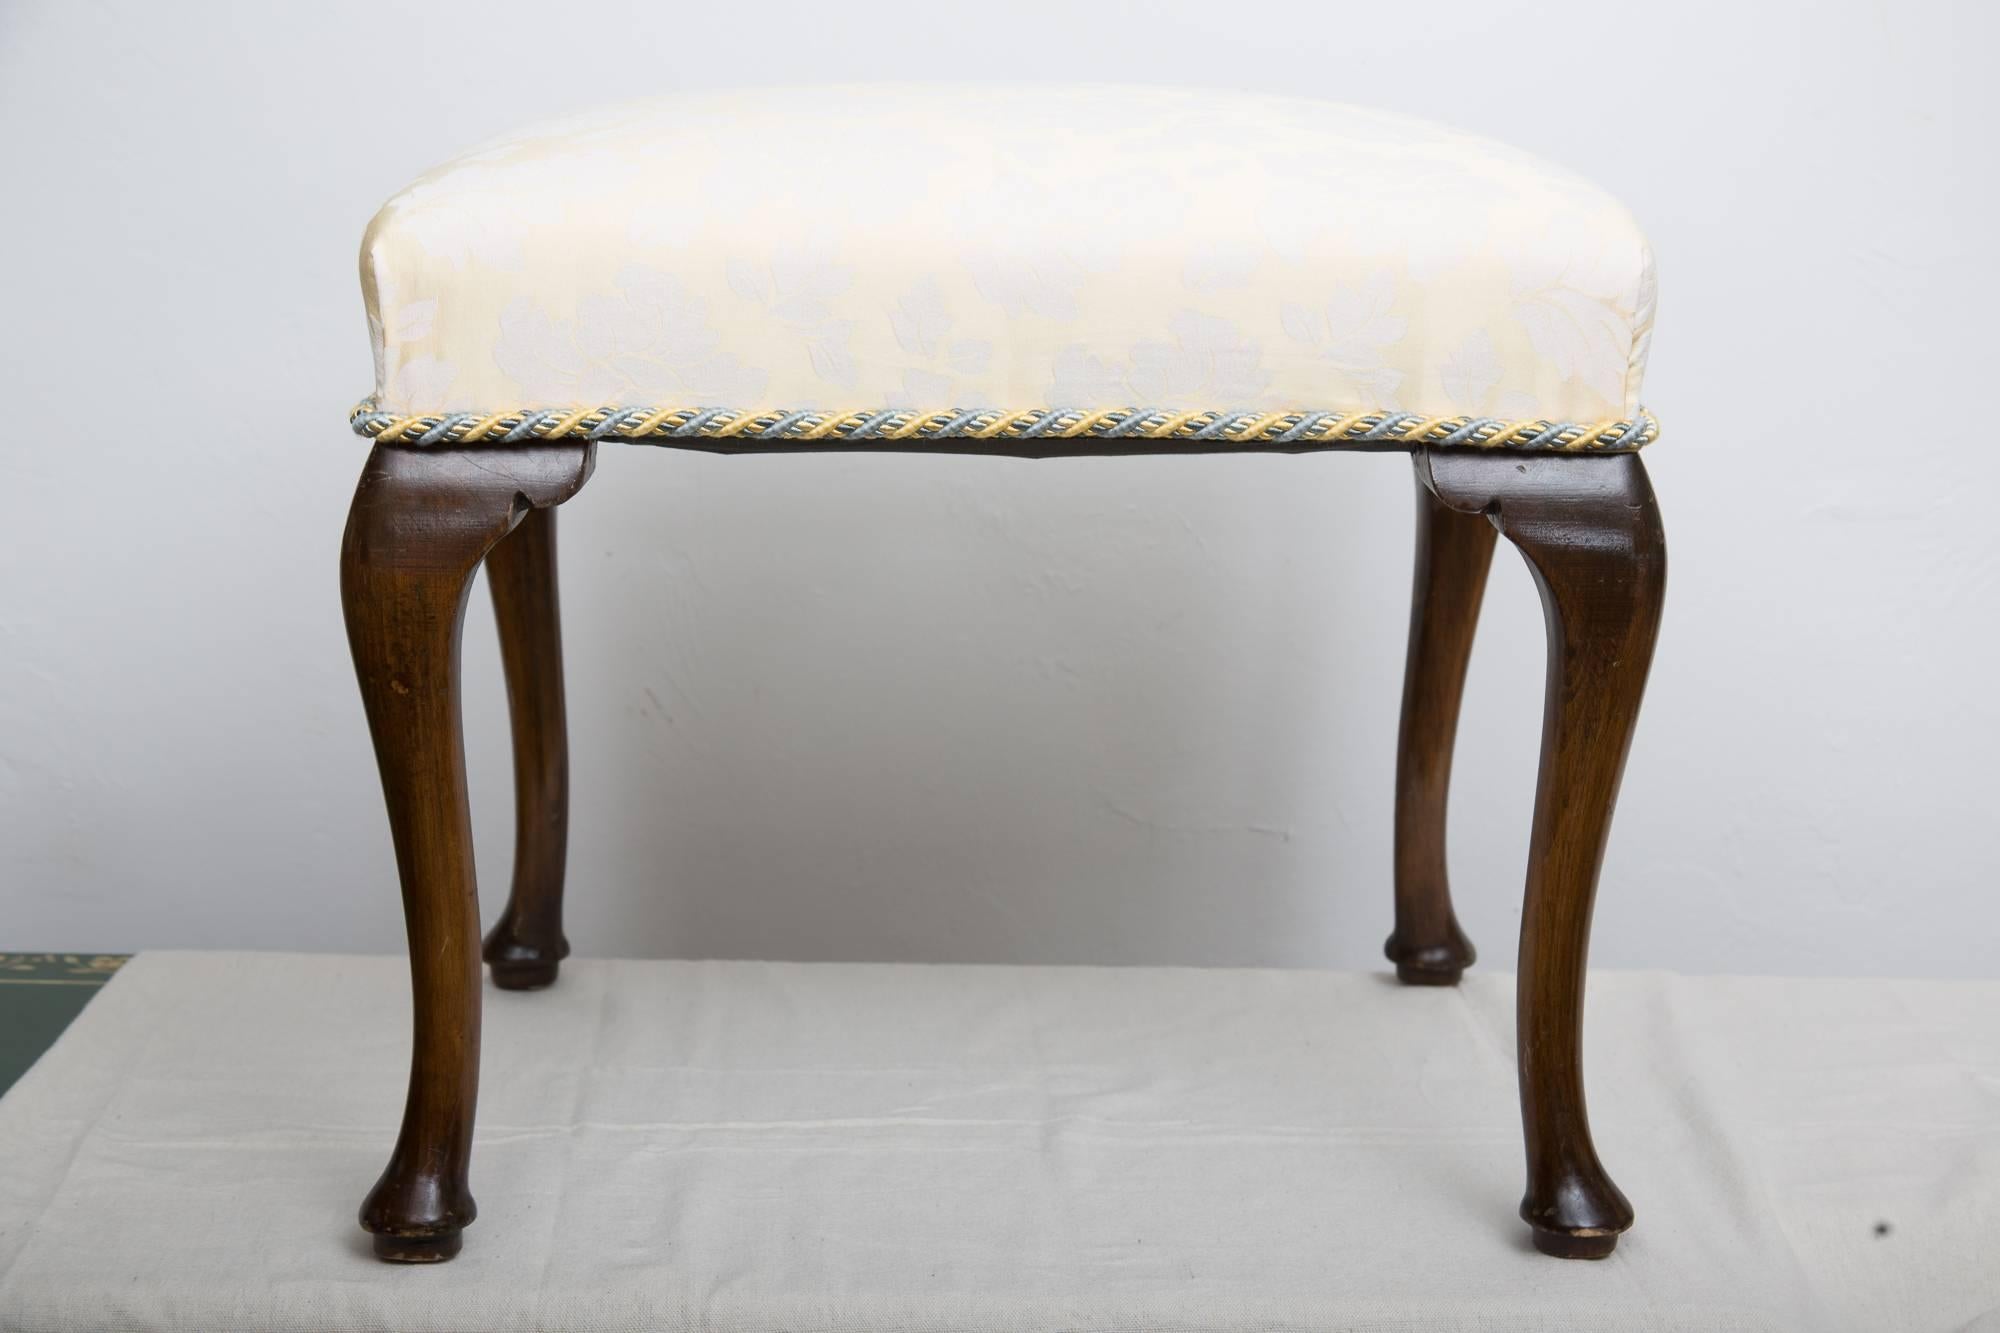 These lovely Queen Anne style benches have a light yellow damask-upholstered top accented with a braided trim intertwining blue and yellow supported by four walnut cabriole legs, early 20th century.